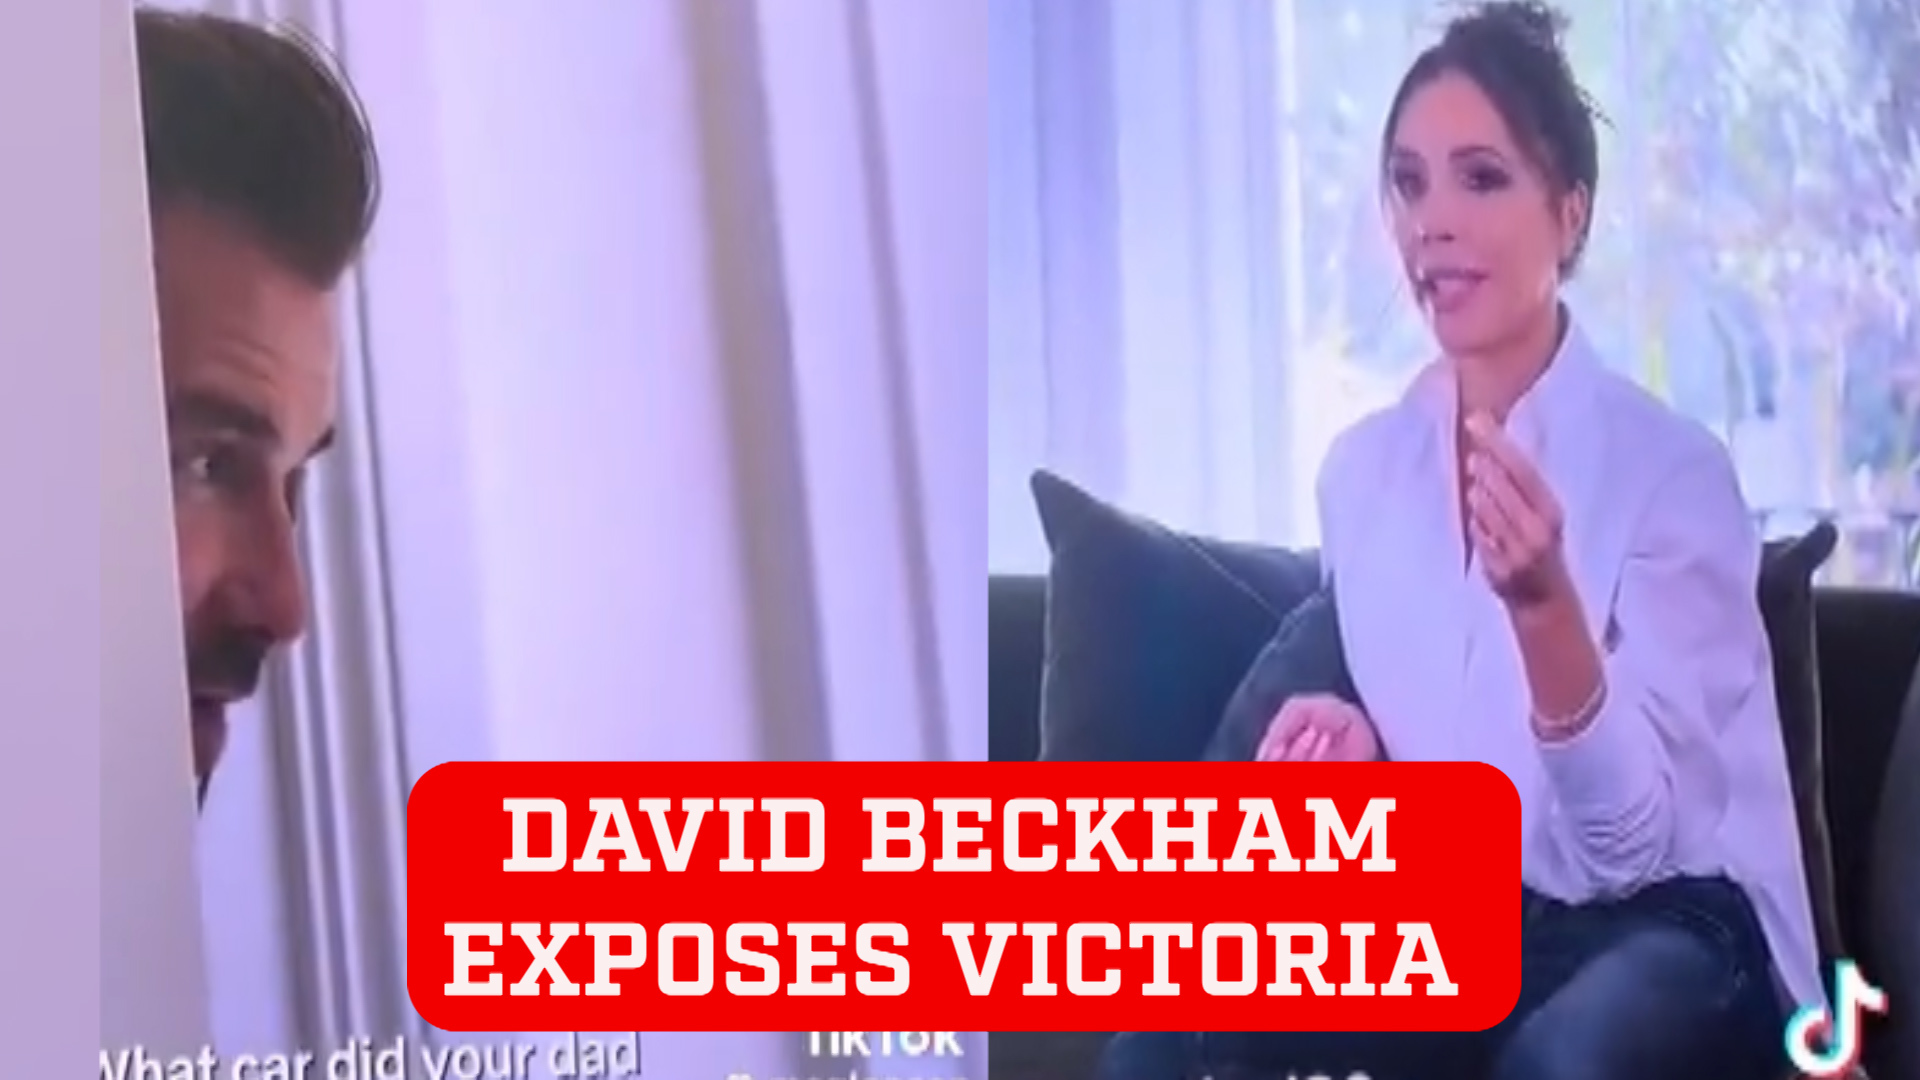 Victoria Beckham's comment that enraged husband David in his new Netflix documentary